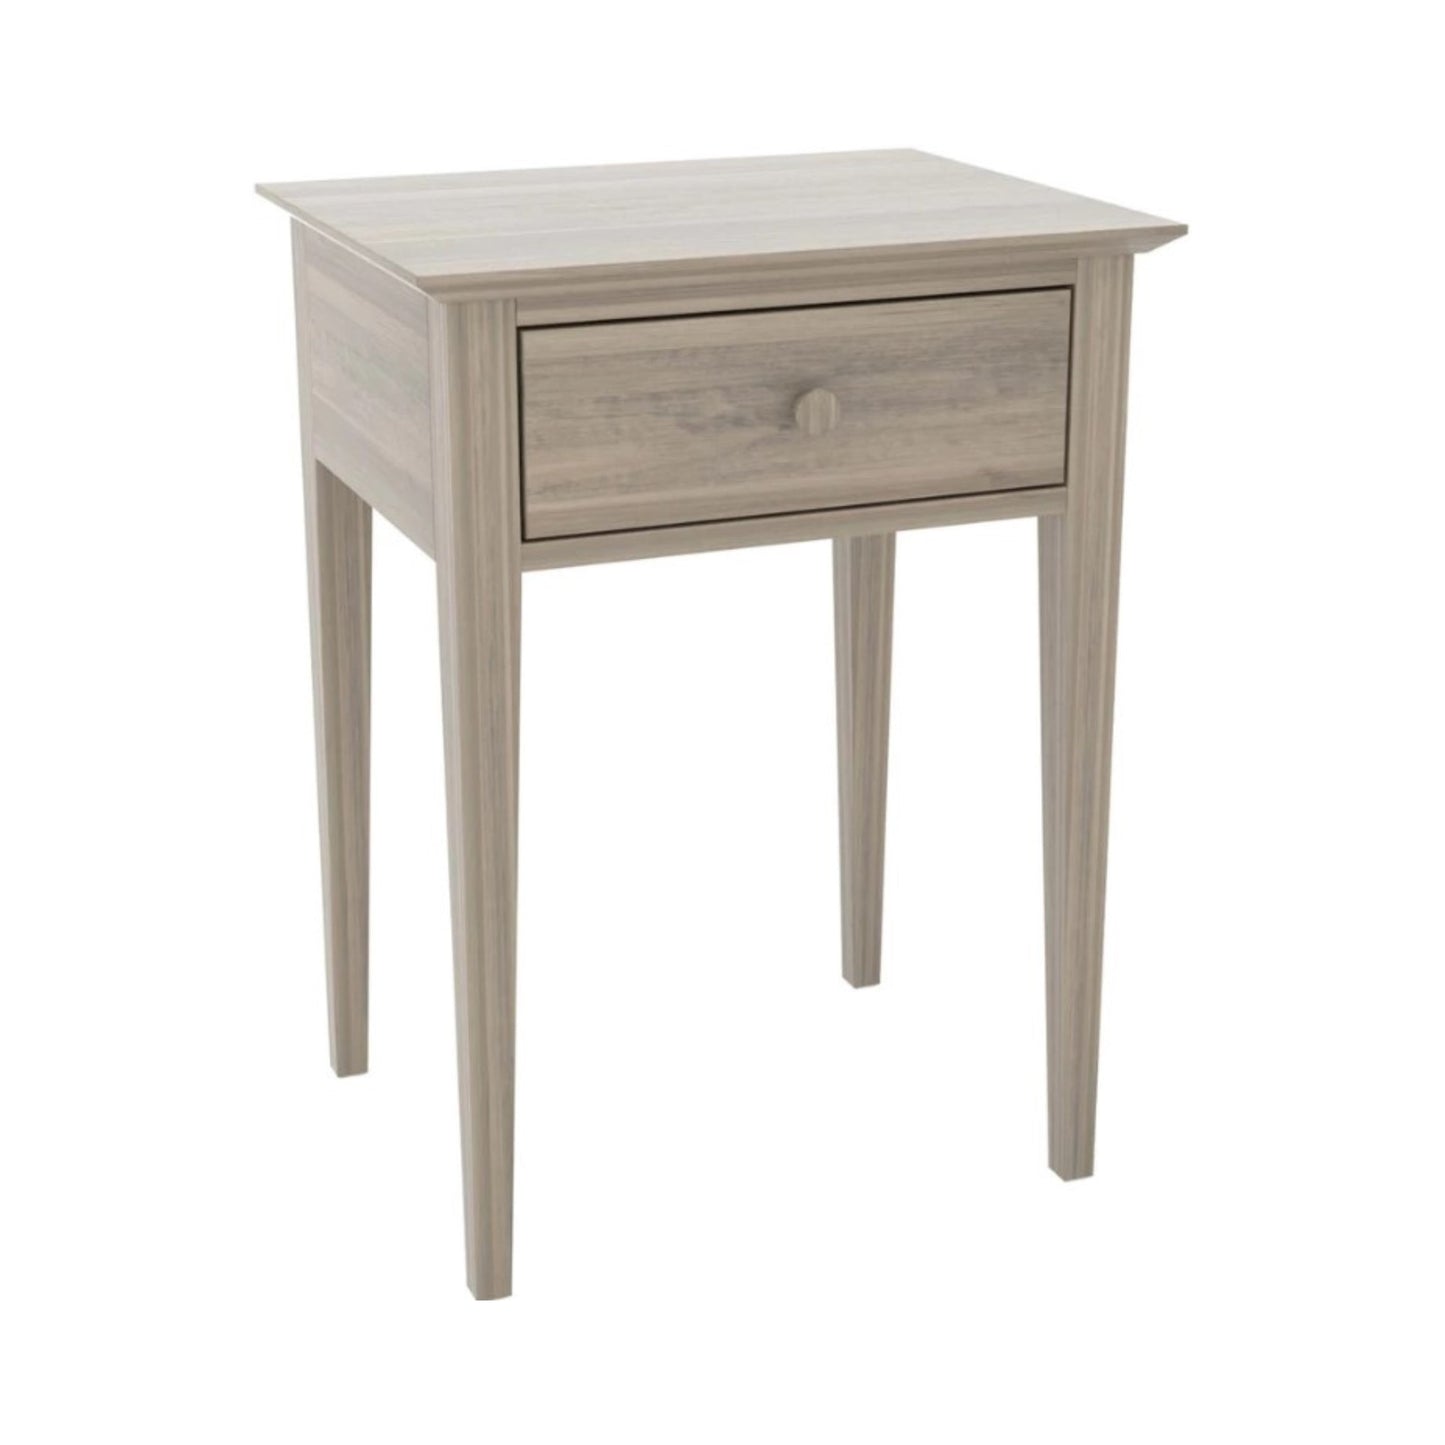 Gable Road One-Drawer Nightstand